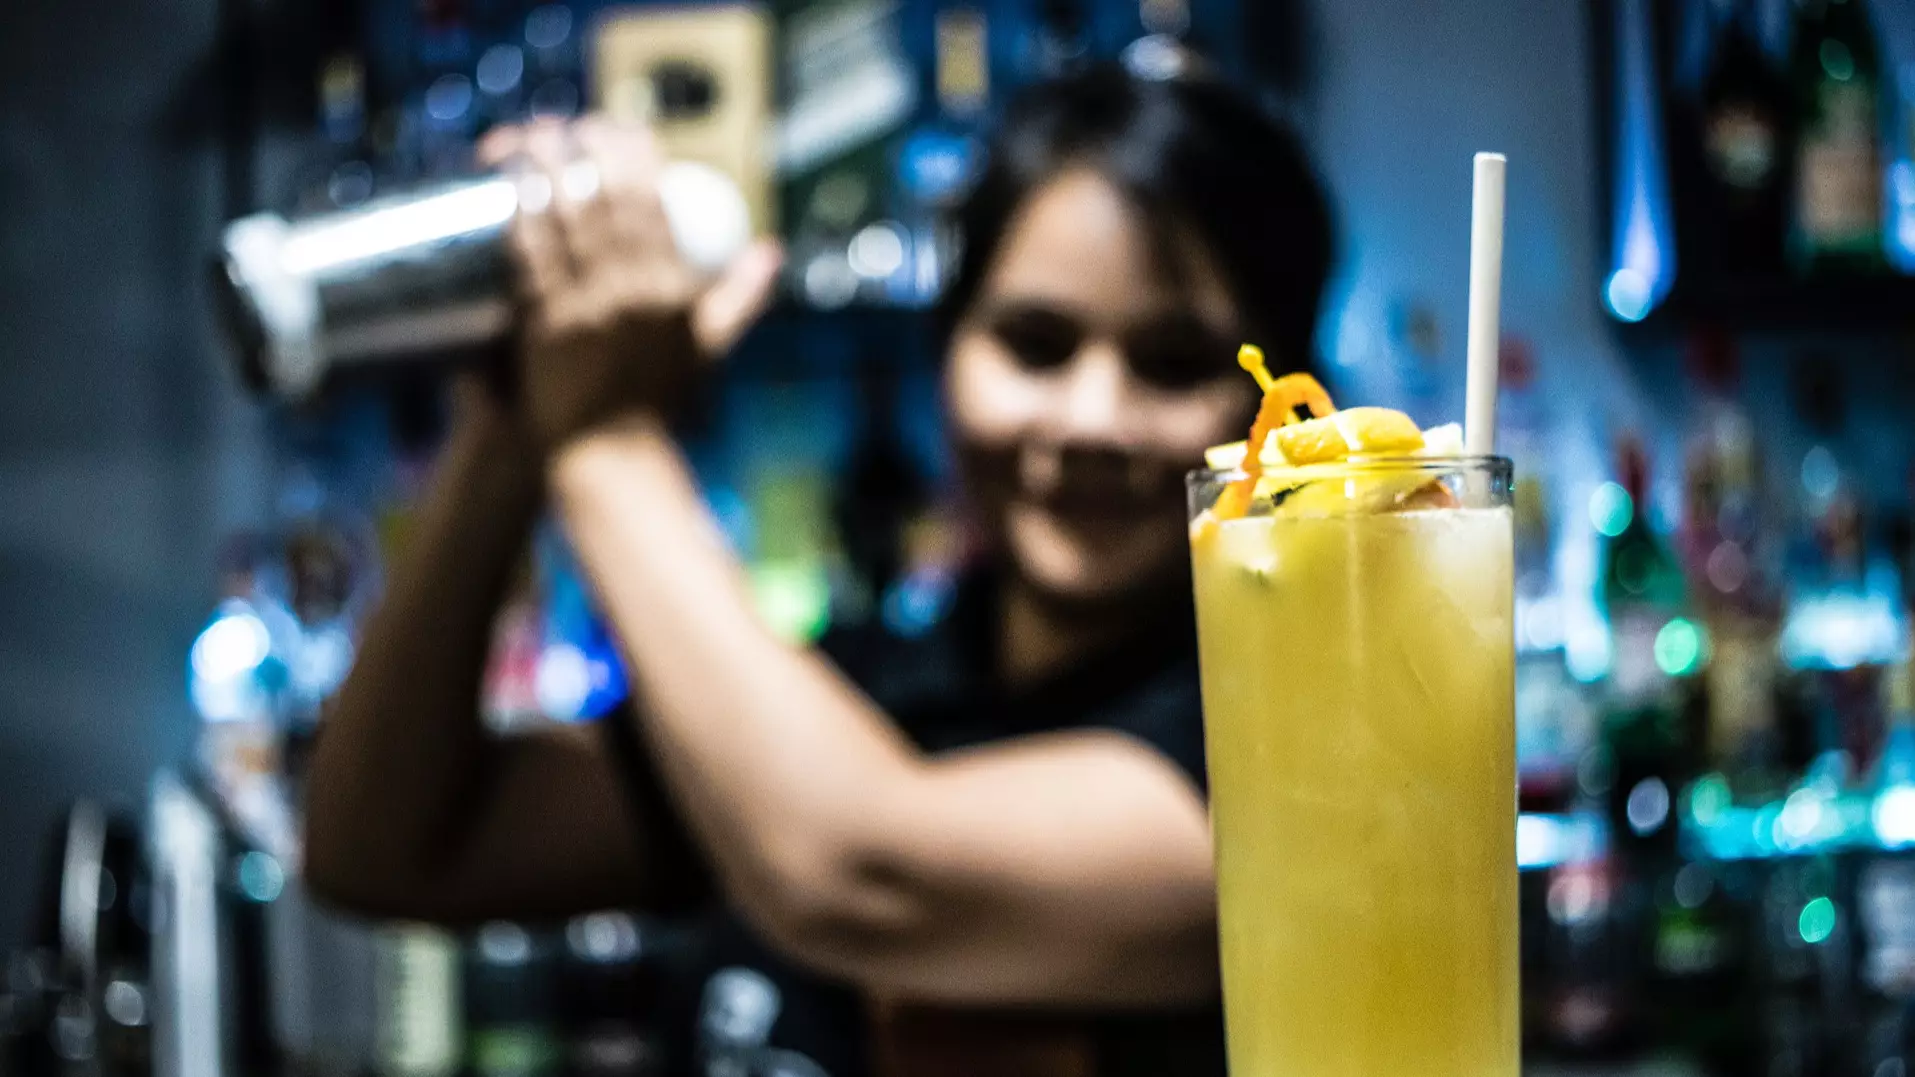 Bartenders’ Numerical Code Reveals What Number Staff Say When Customer Is Attractive